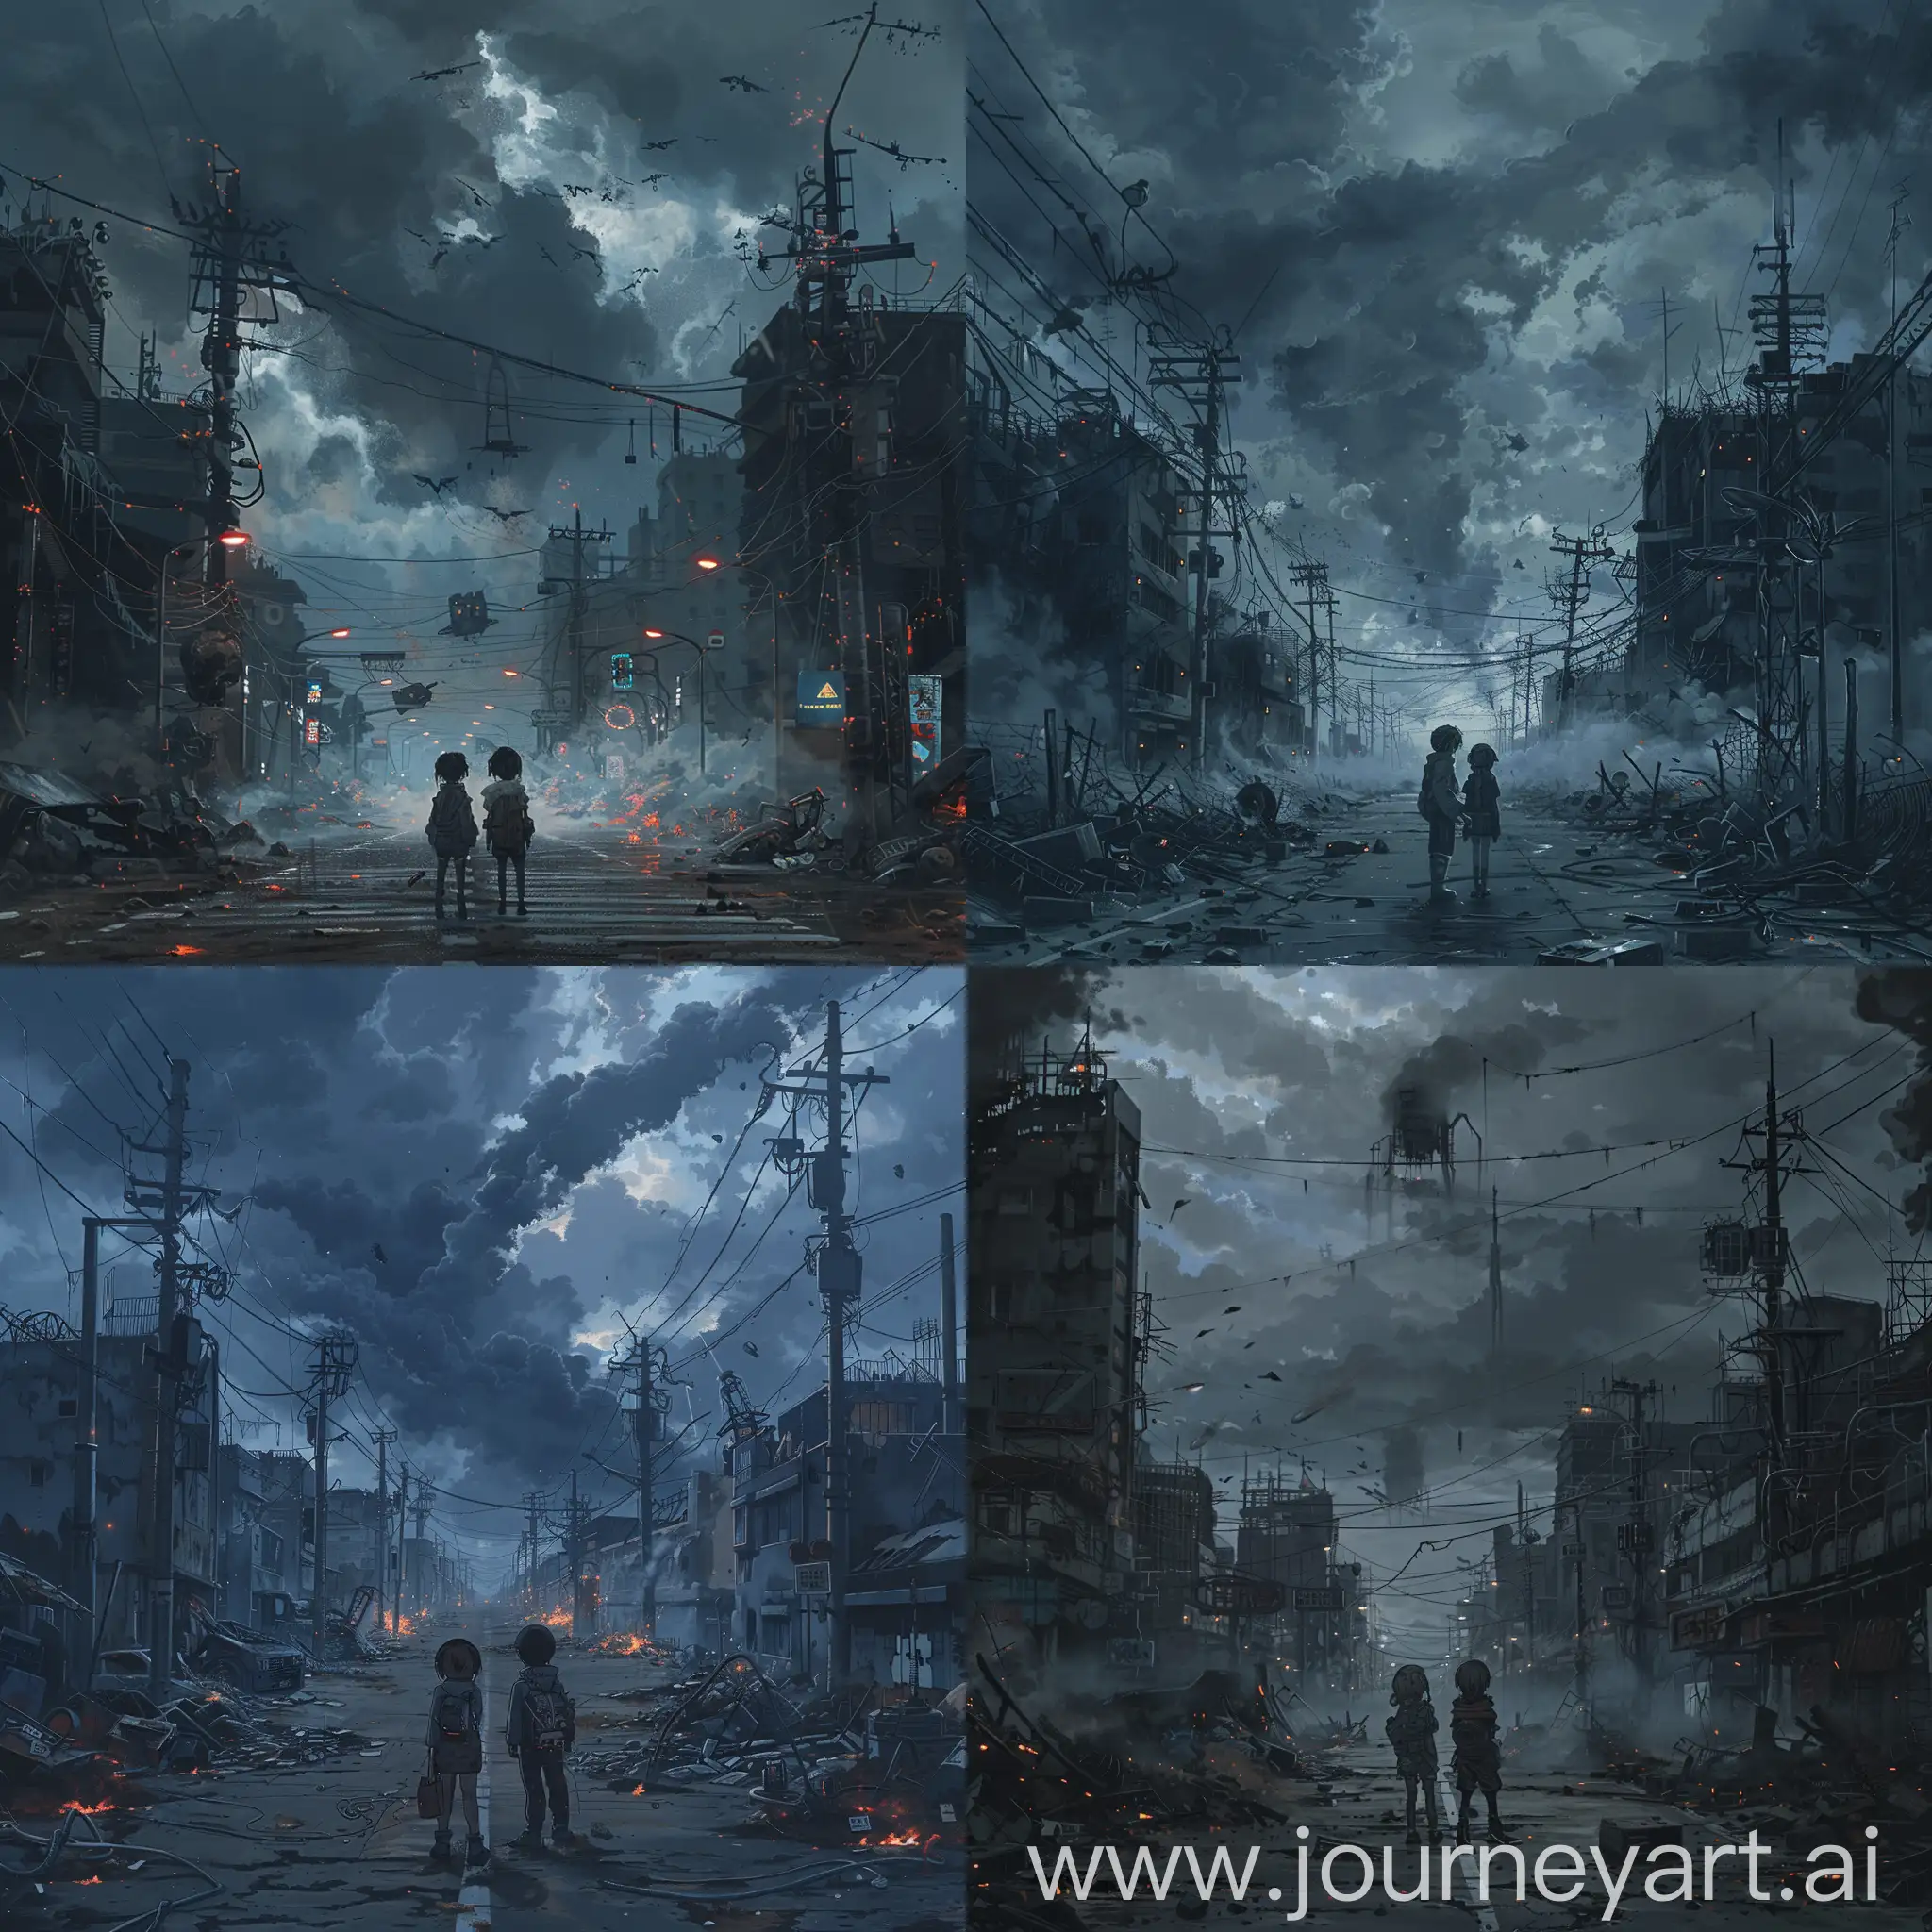 Create an apocalyptic anime-style painting depicting a future cyberpunk world without electricity. A group of two anime characters stand on an empty street, surrounded by destroyed buildings and debris from technological devices. There is darkness all around, as there is no more electricity, and only the flickering lights of distant light sources penetrate through the fog and dust. The atmosphere is filled with horror and hopelessness, and dark clouds hang in the sky, blocking the light from afar."